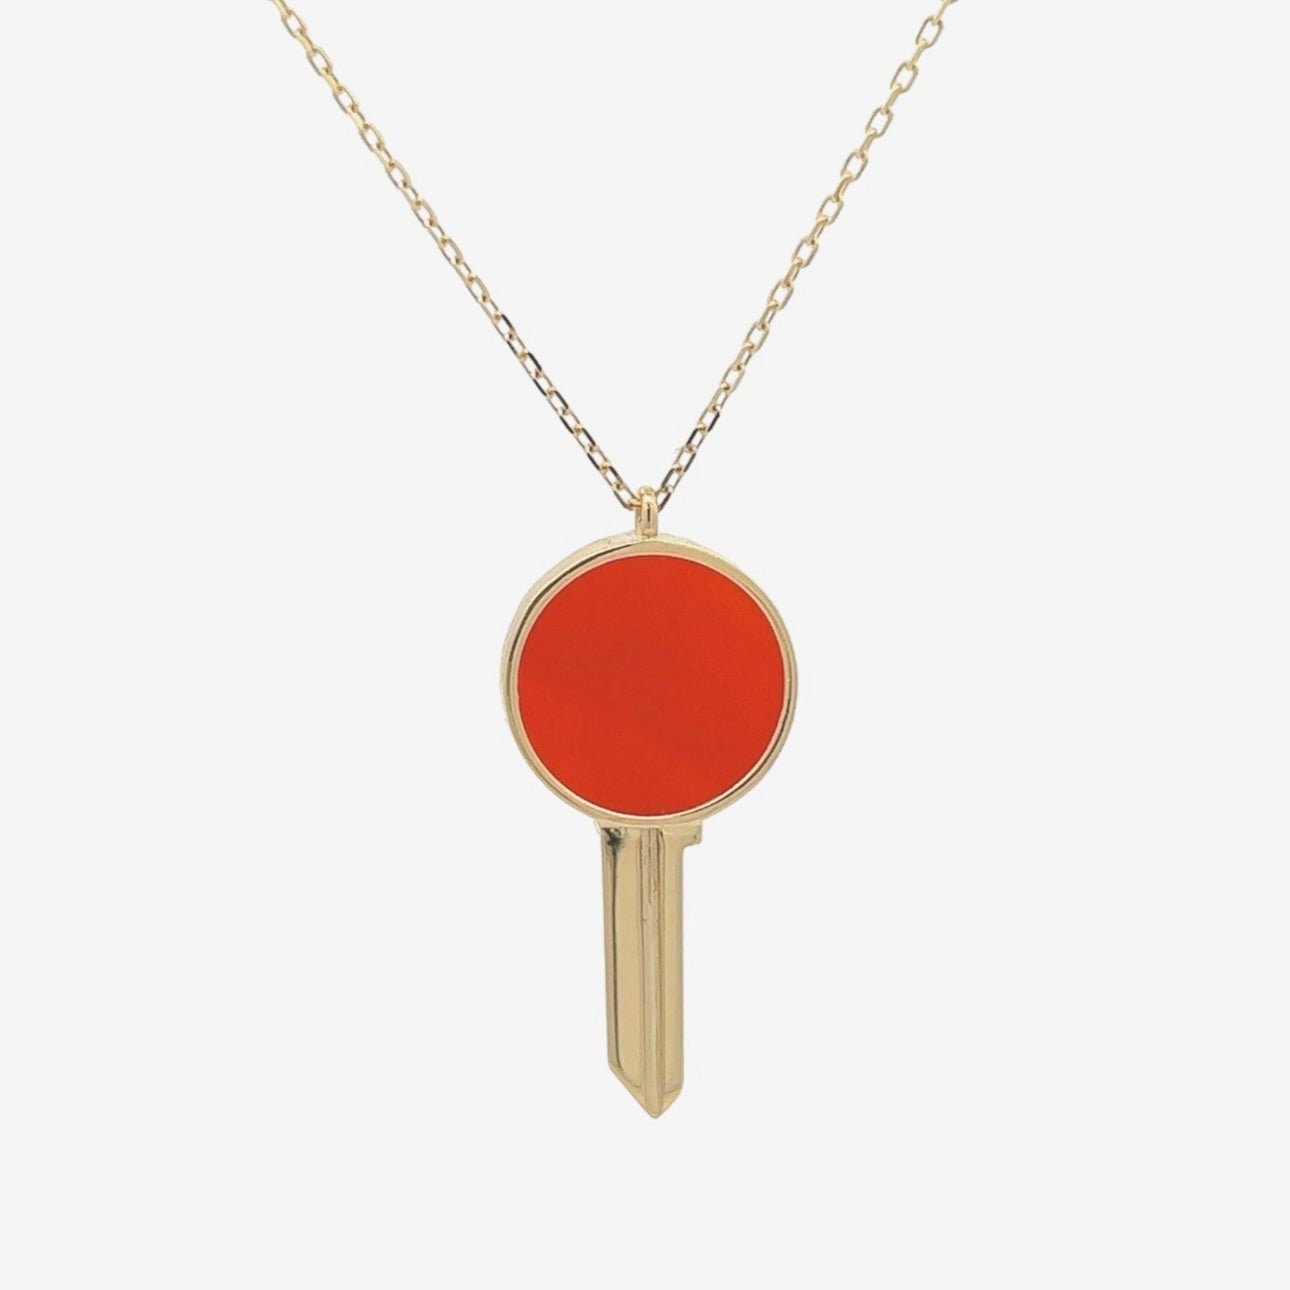 Key Necklace in Red Carnelian - 18k Gold - Ly